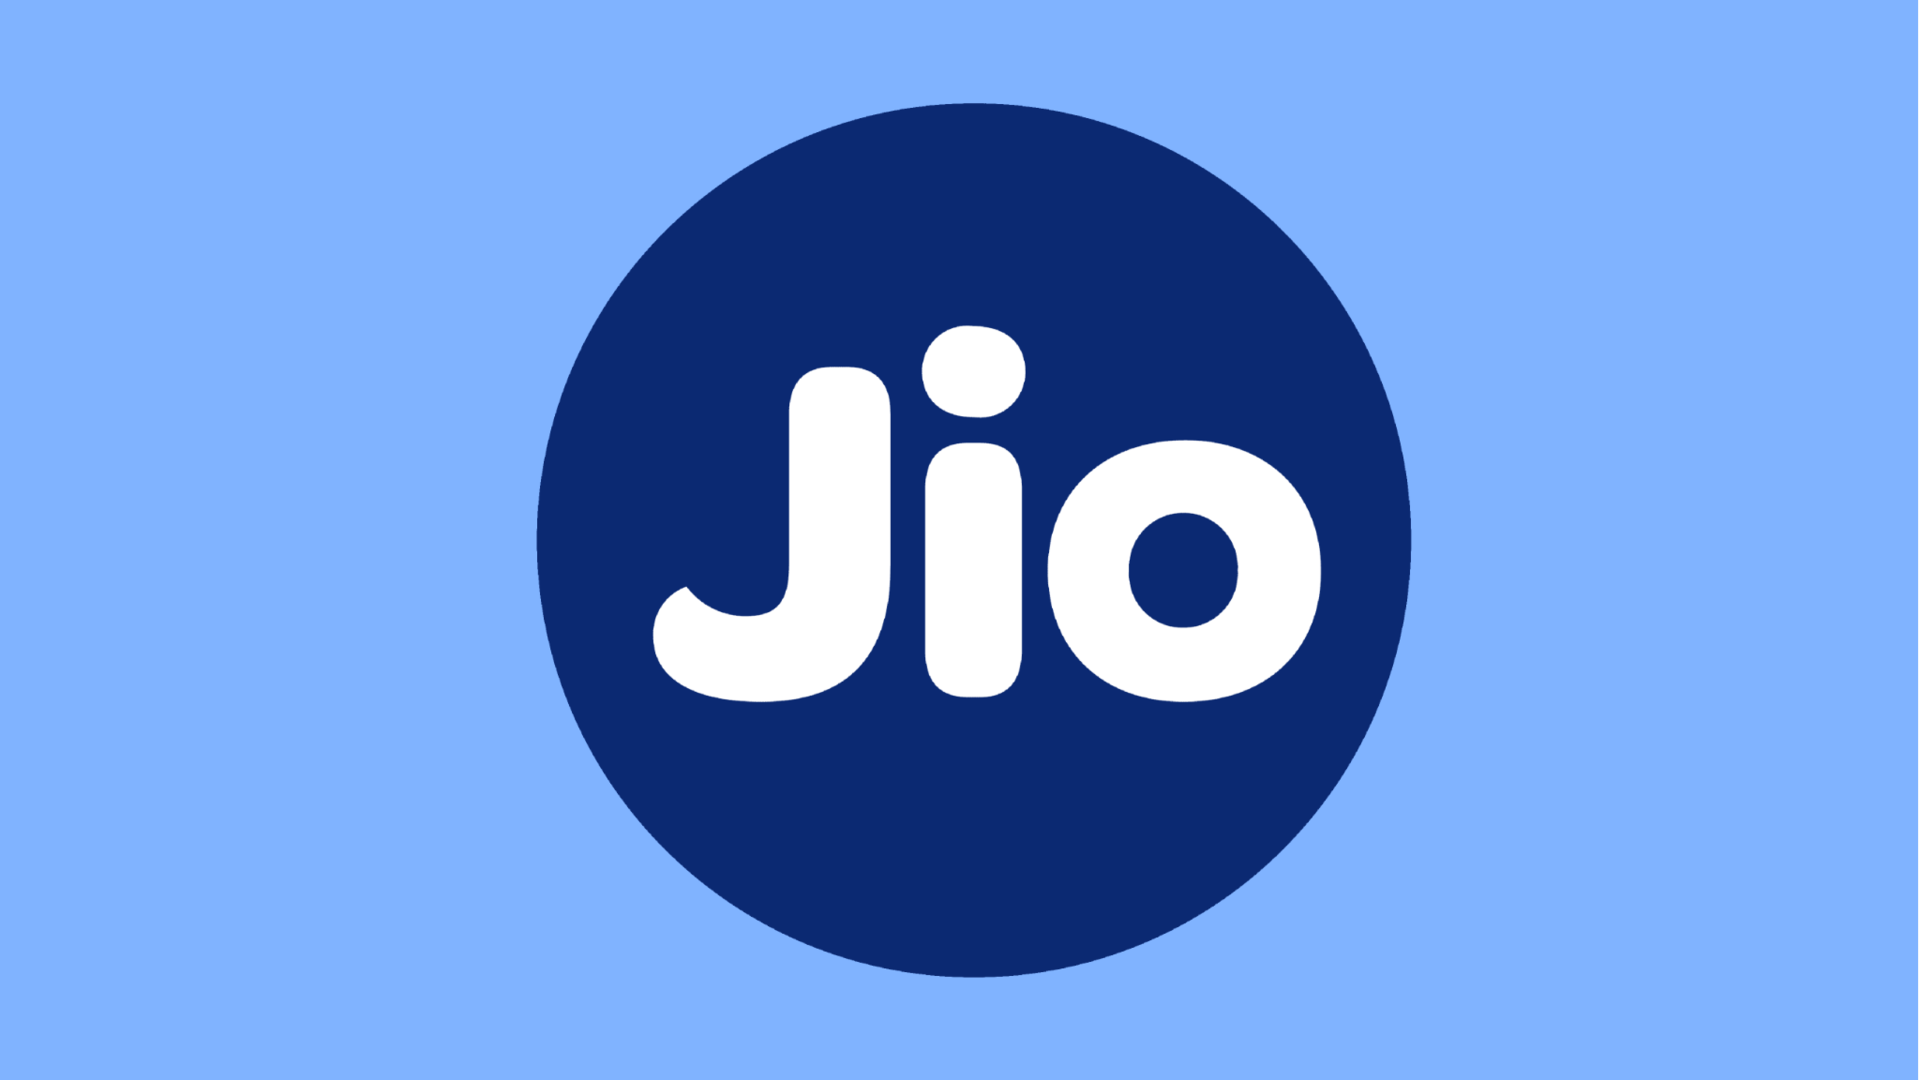 Apple to partner with Reliance Jio: Tim Cook